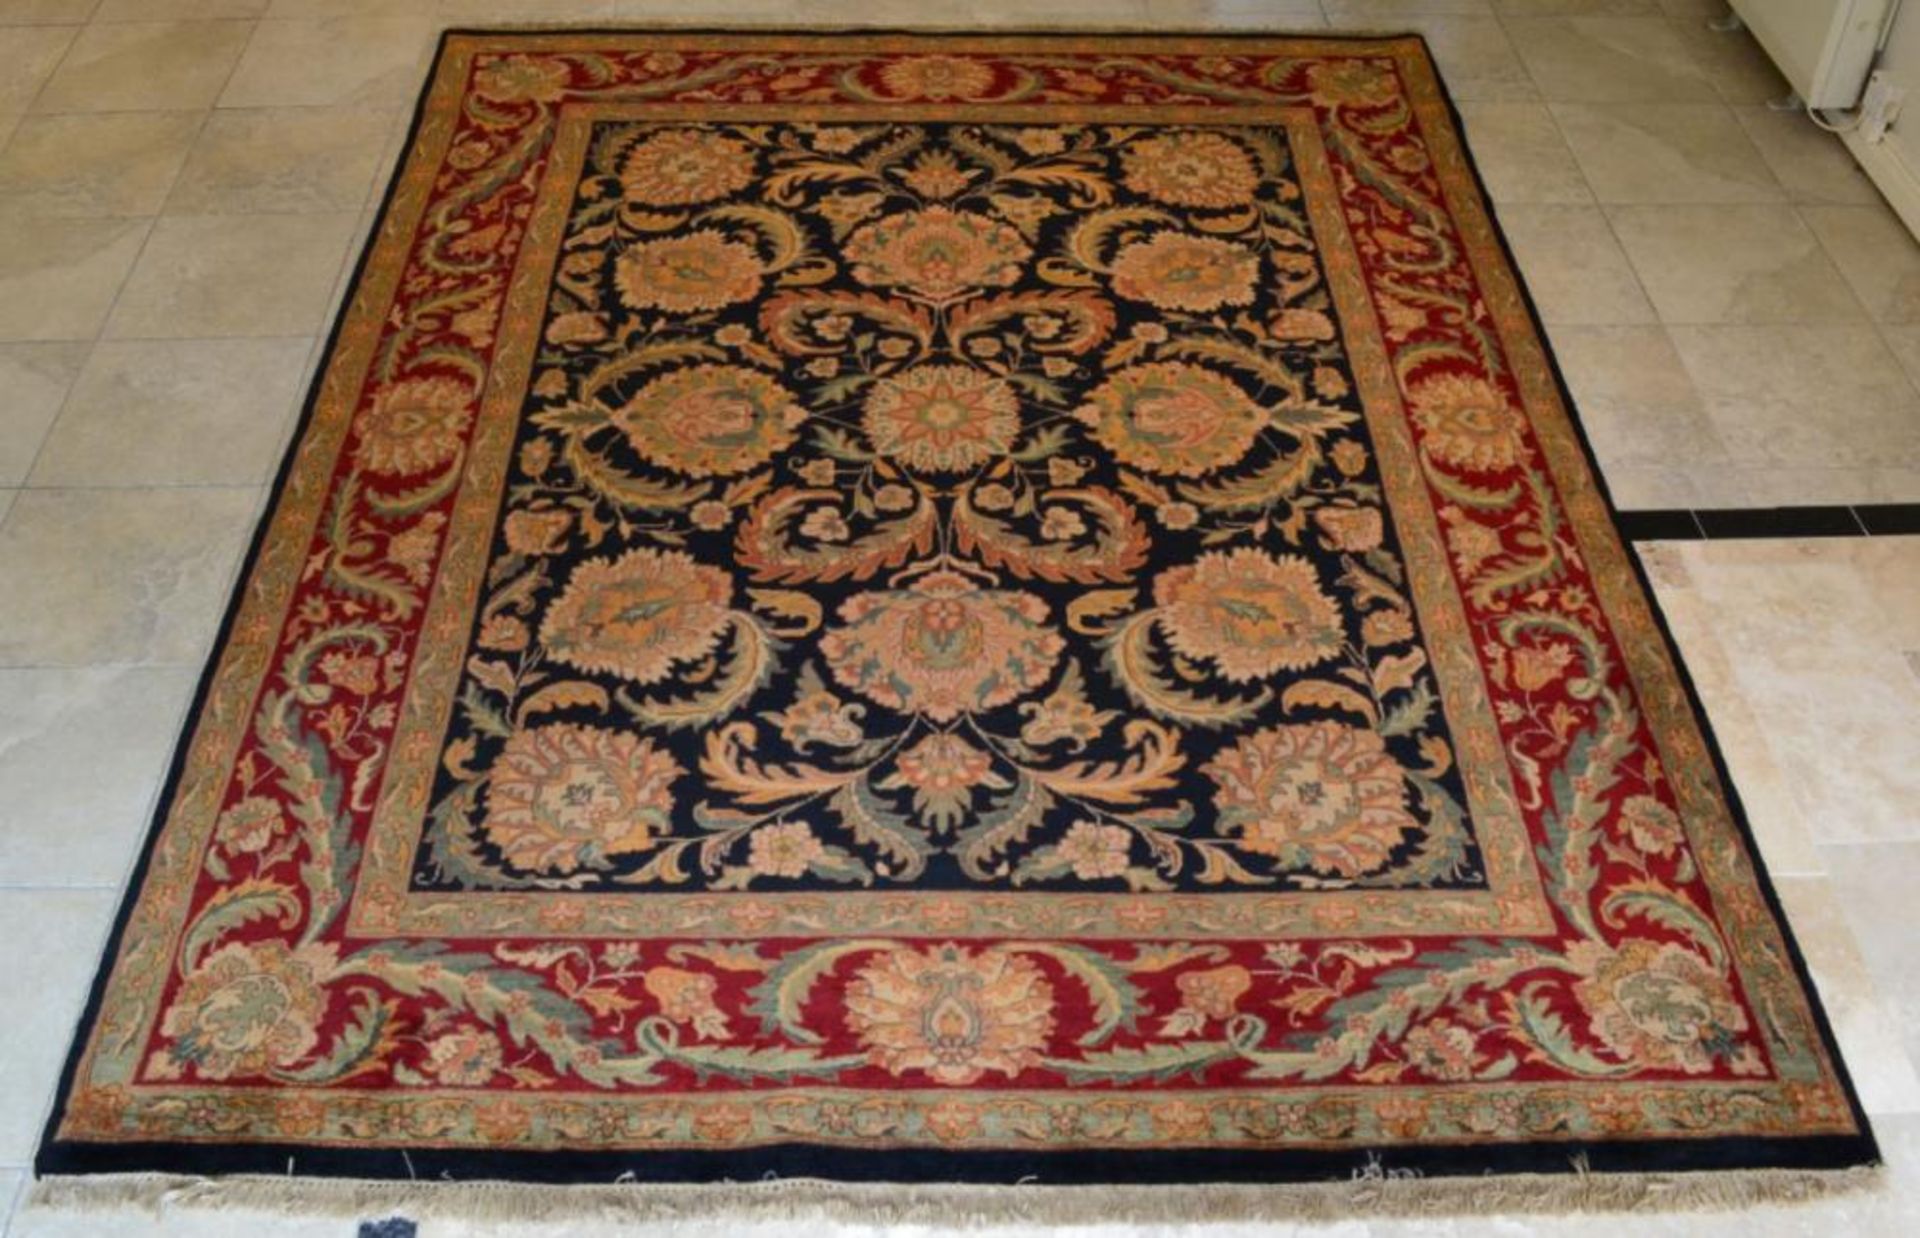 1 x Red and Black Jaipur Handknotted Carpet - Handwoven In Jaipur With Handspun Wool And Vegetable - Image 7 of 16